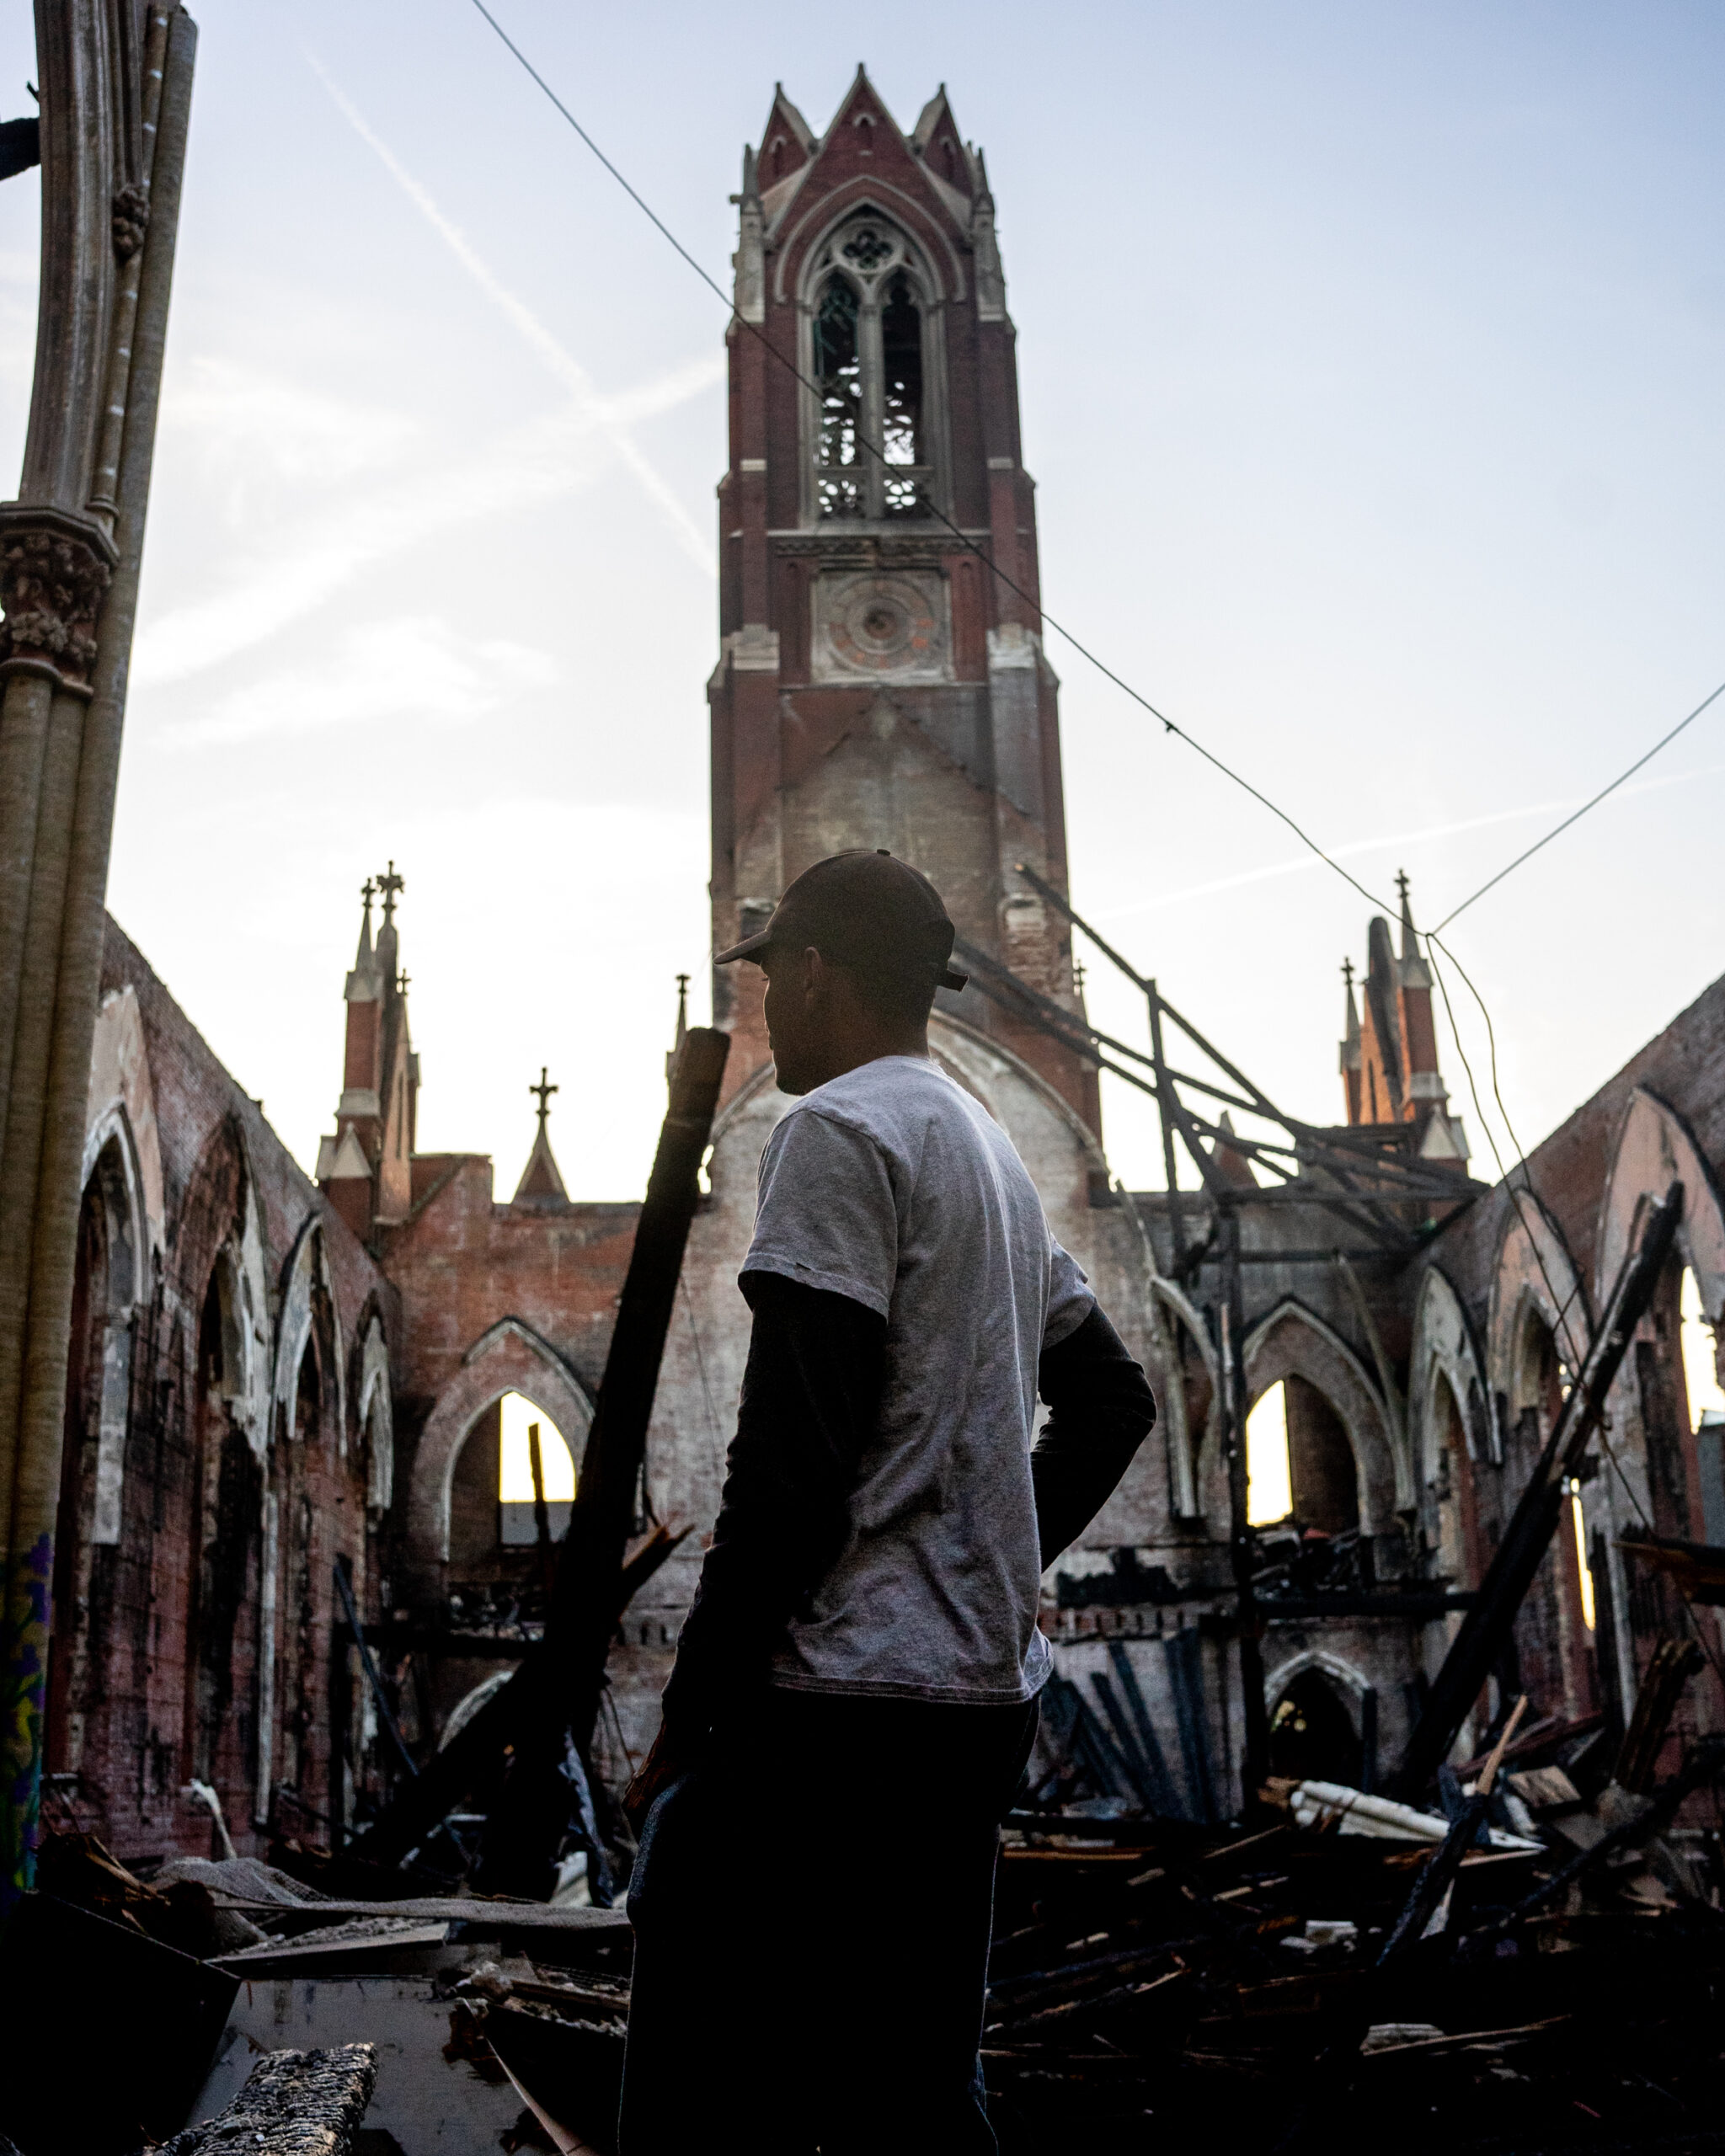 A young Black man in a baseball cap stands inside the remains of a church sanctuary, silhouetted against the steeple and the sky.